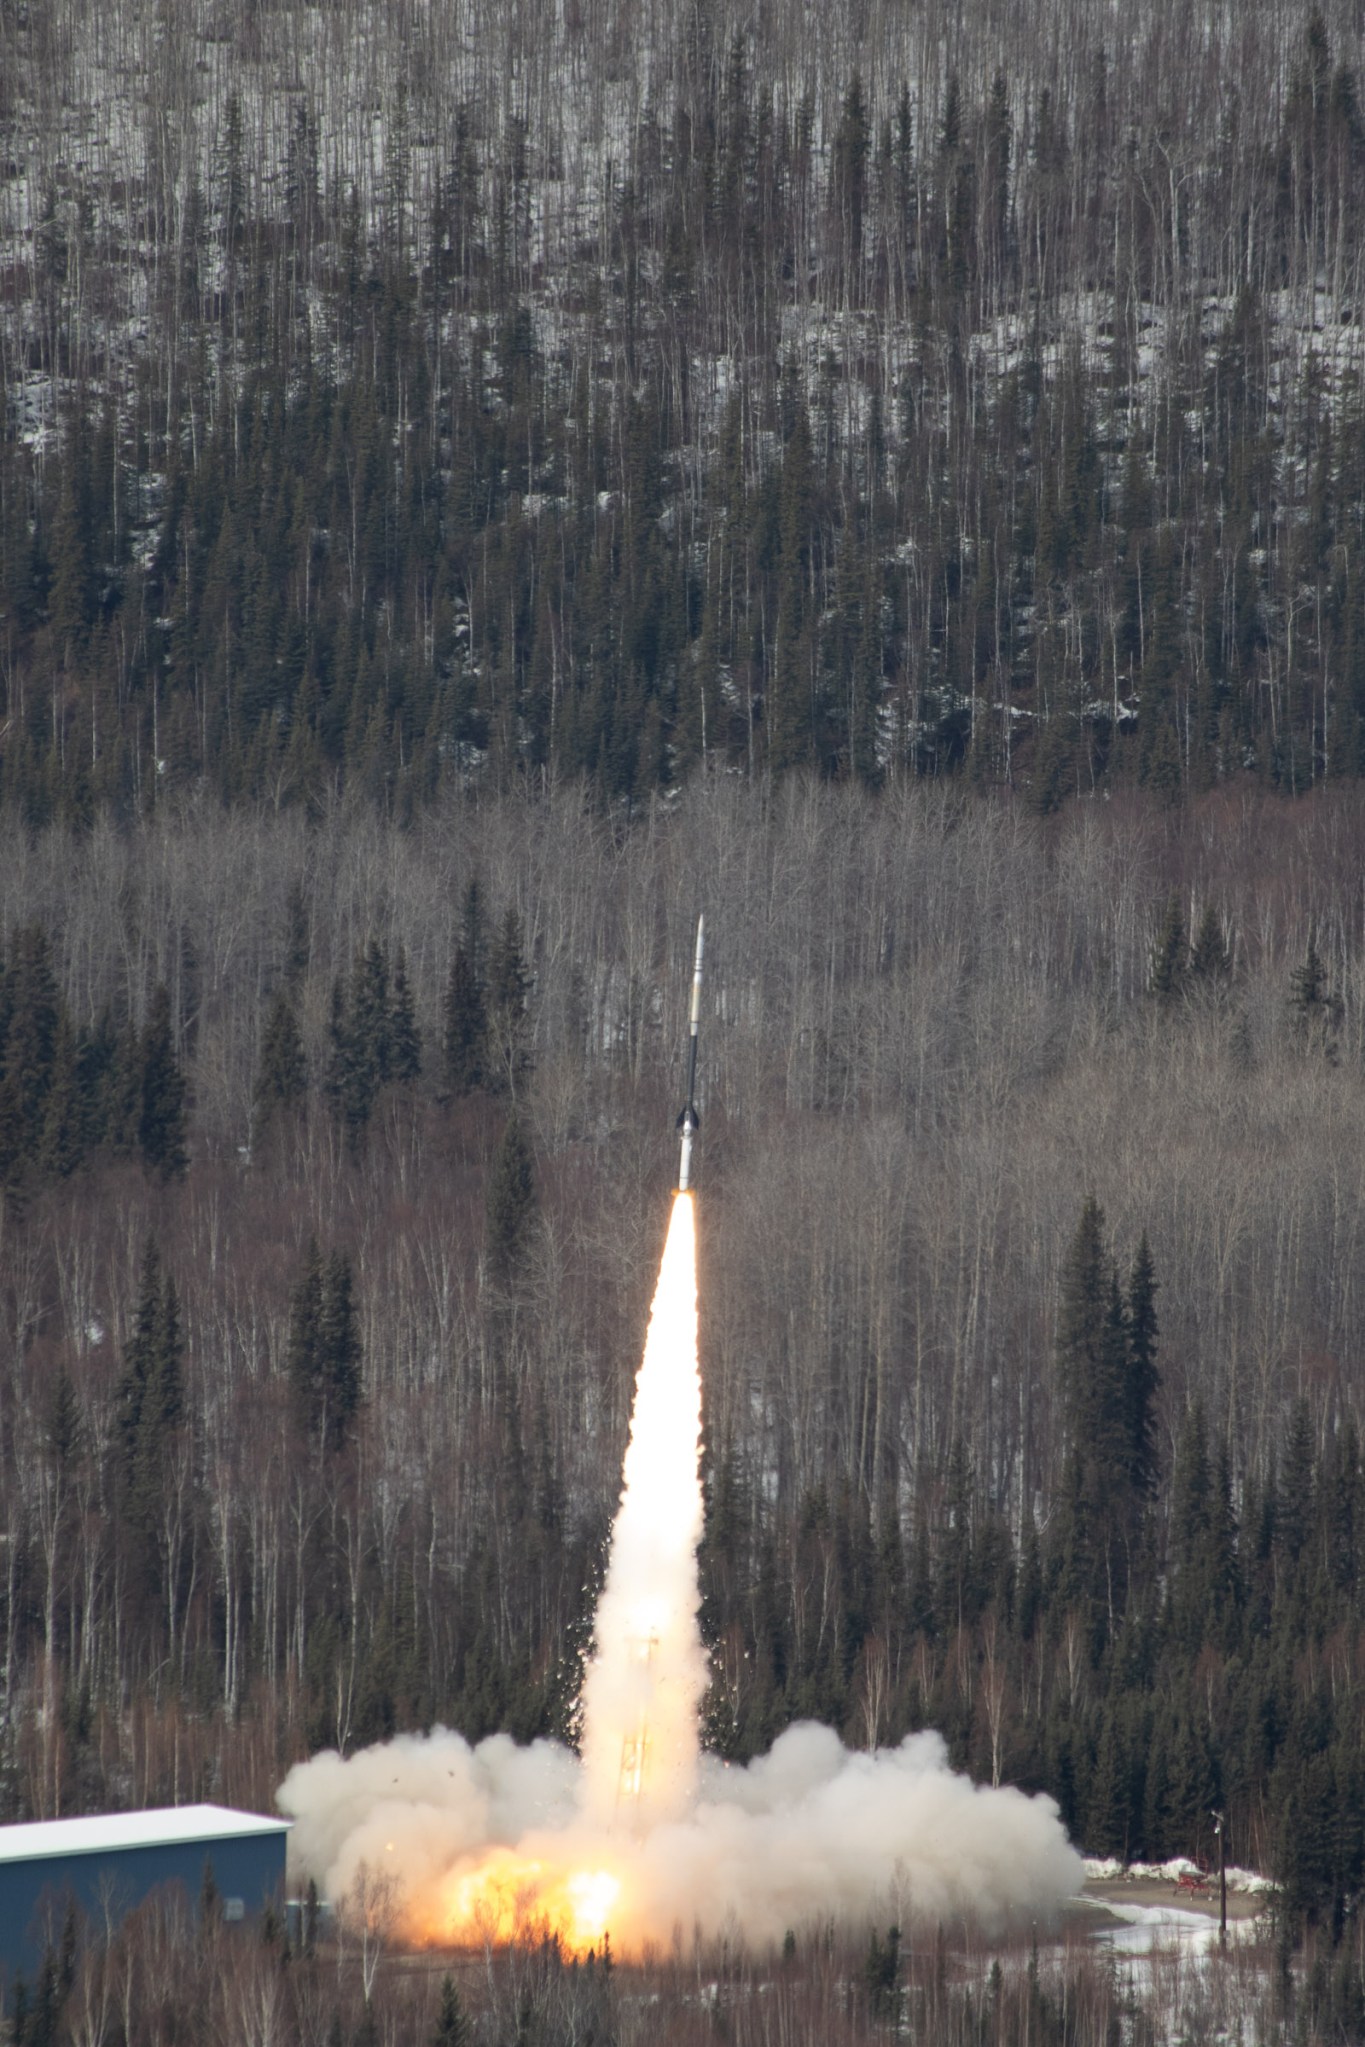 A sounding rocket just seconds after launch with a bright white plume of smoke trailing underneath against a muted snowy landscape.